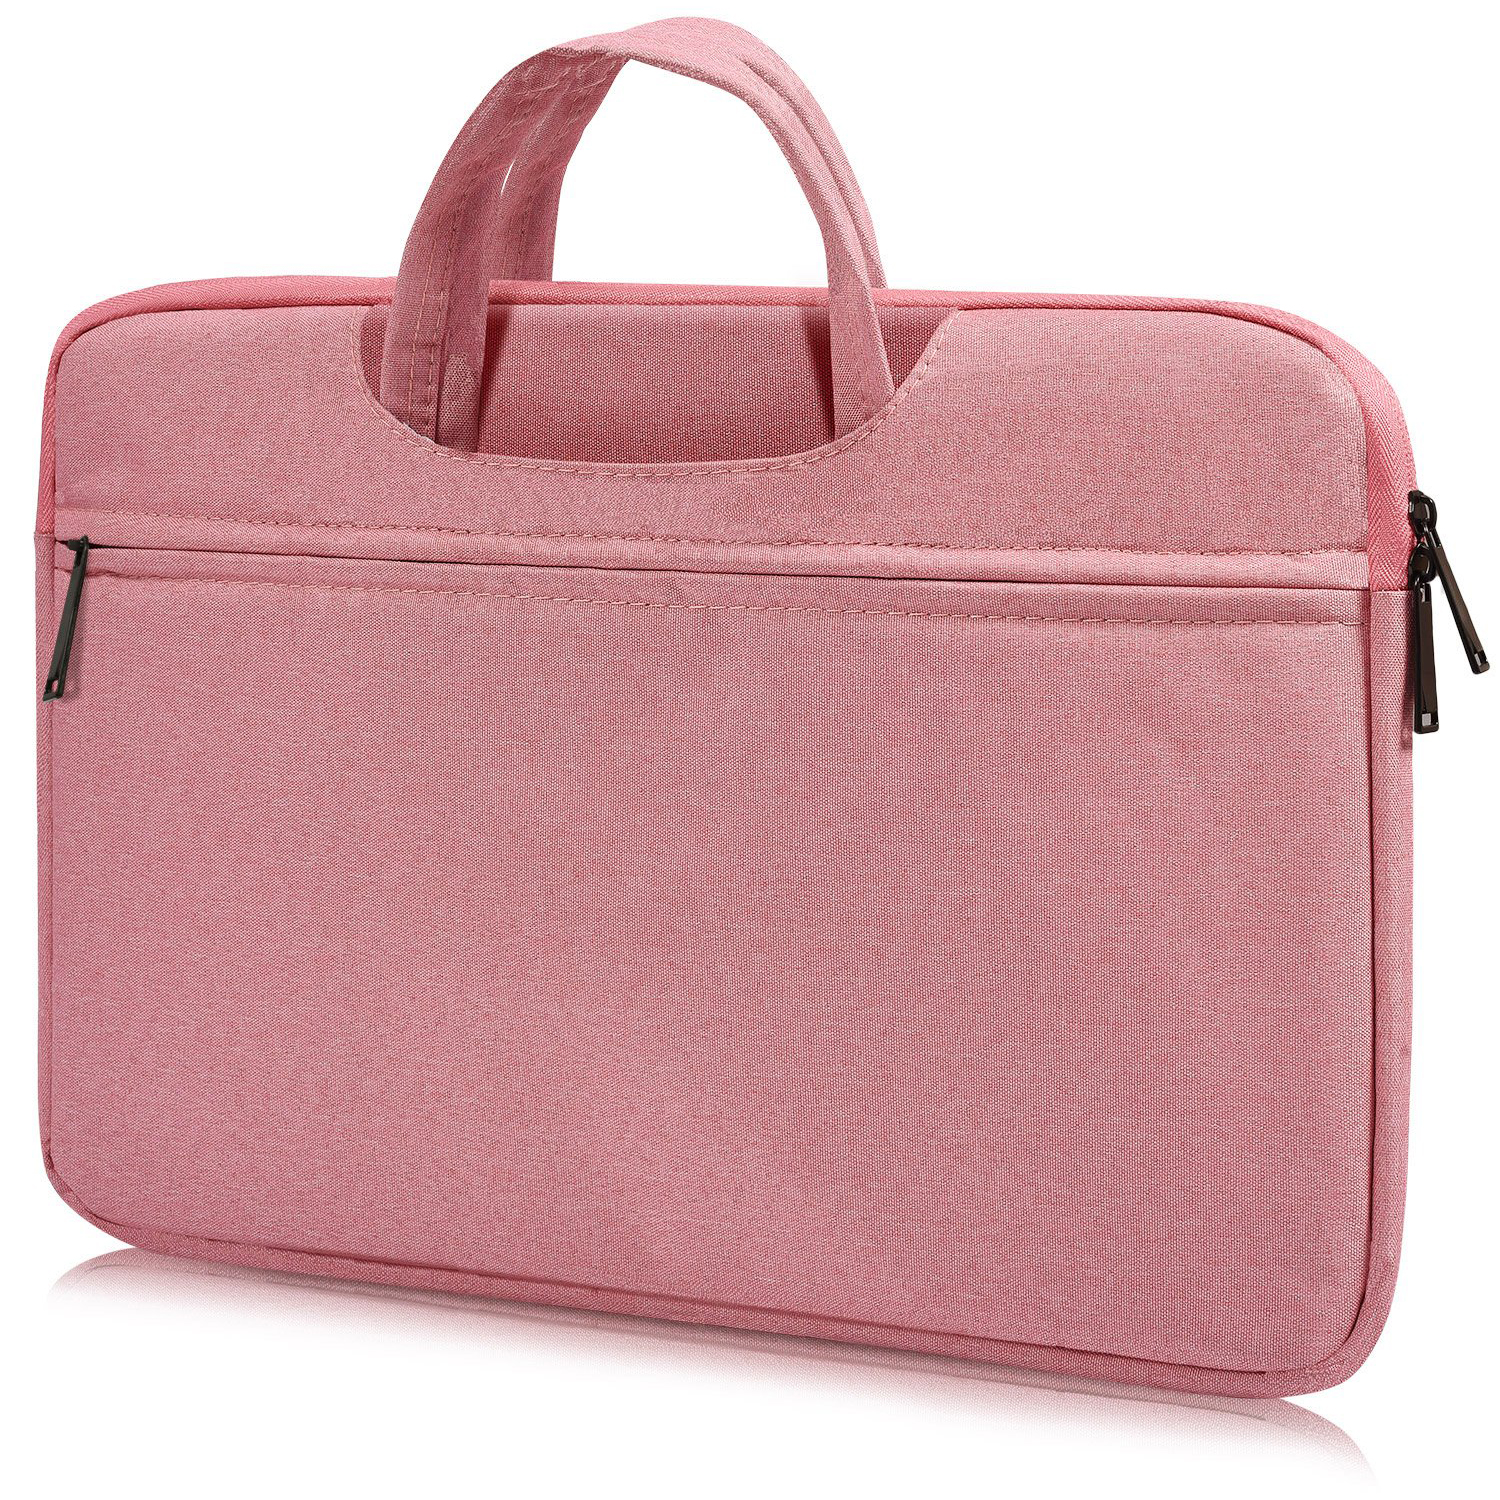 2021 Pink High Quality Custom Business Laptop Bag For Women